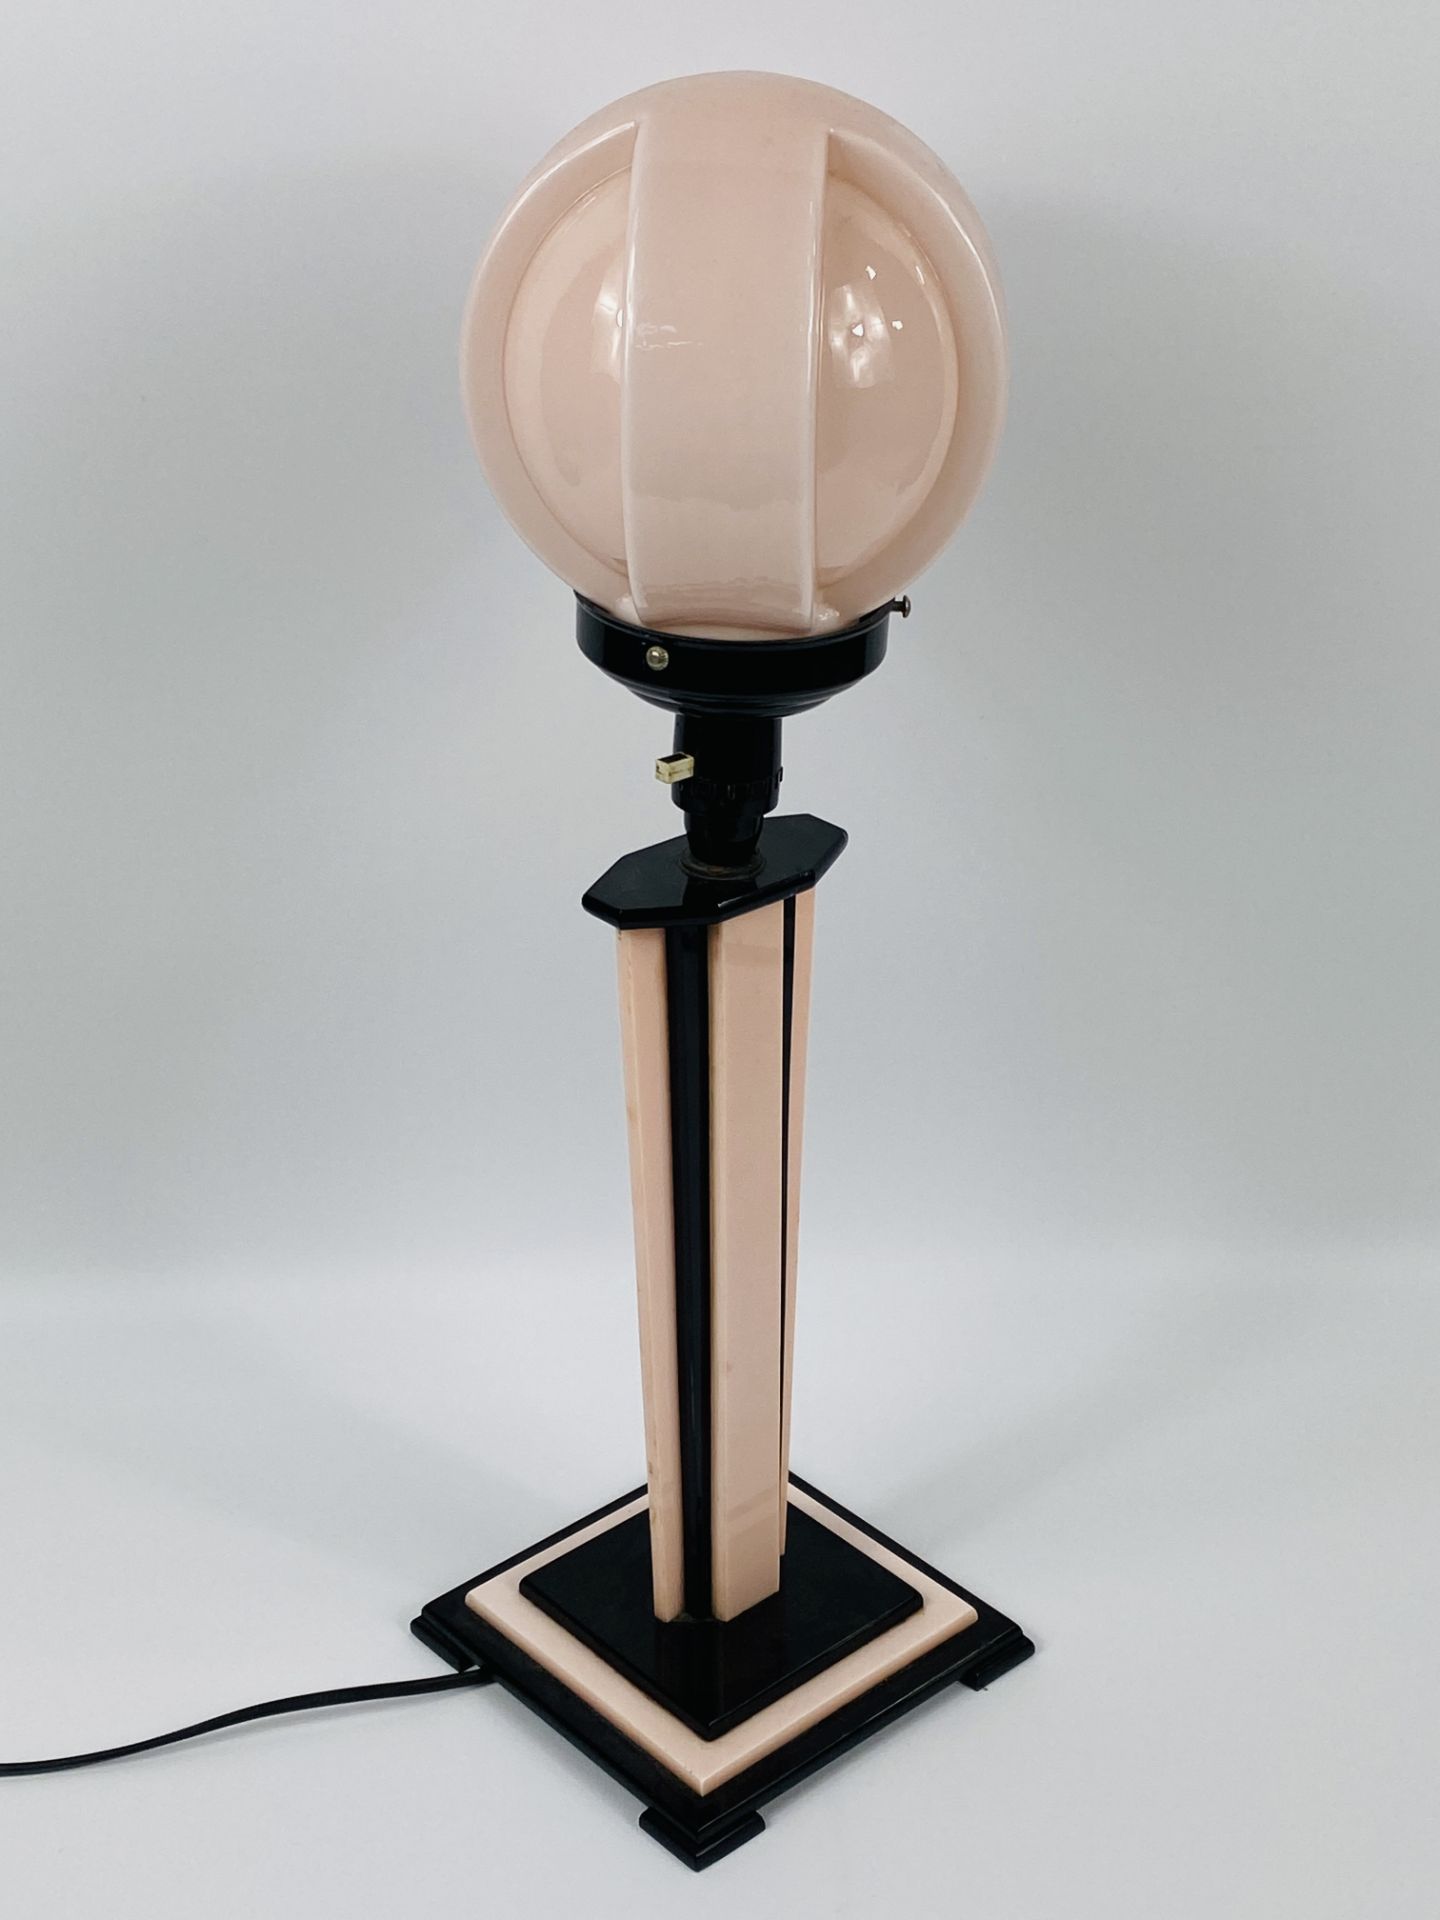 Art deco table lamp - Image 3 of 6